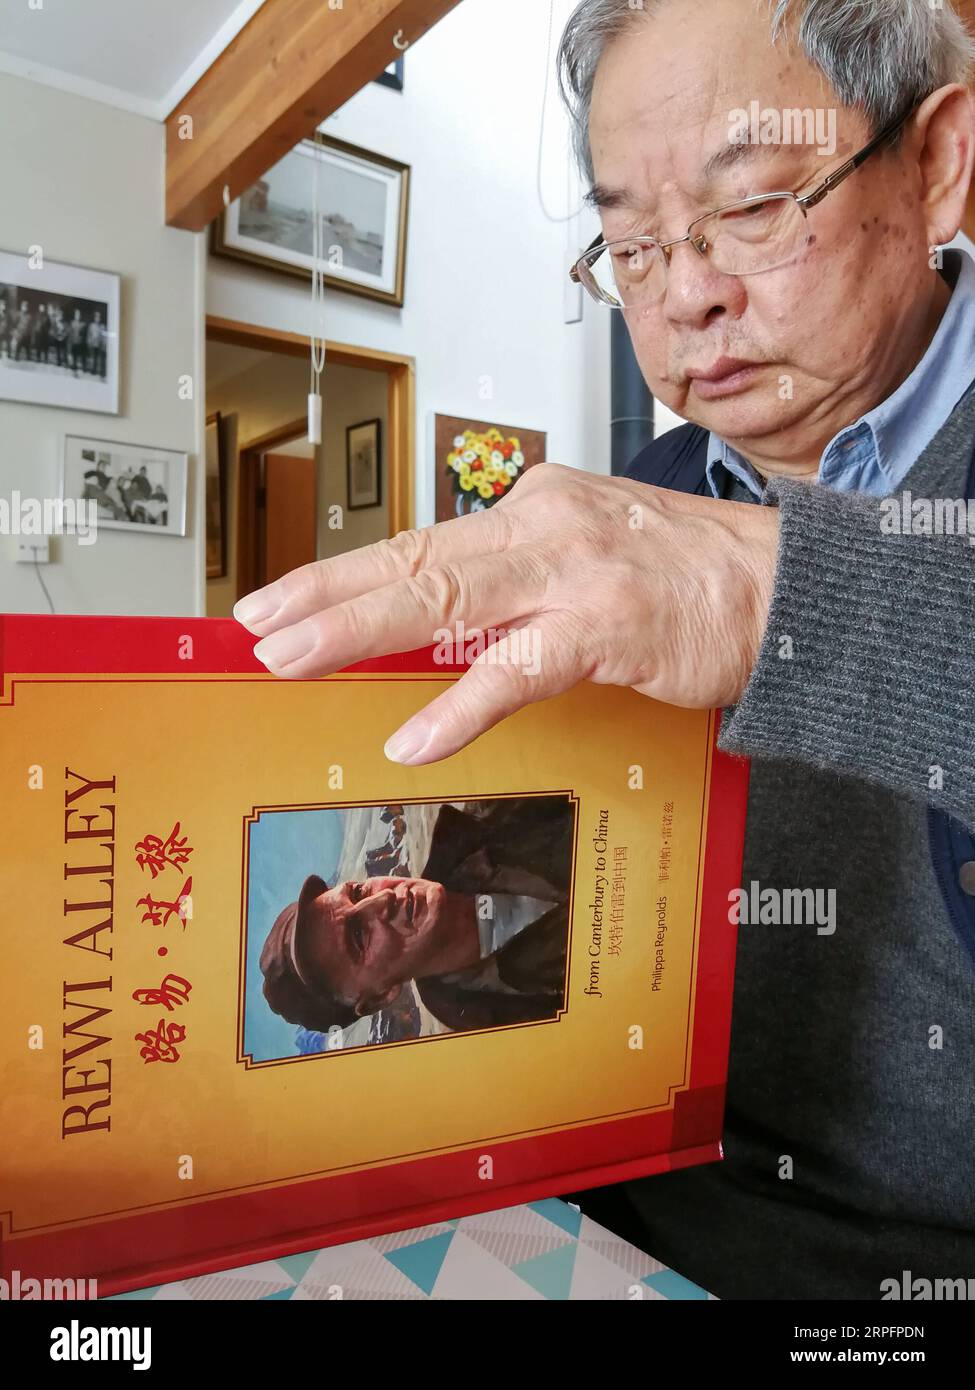 190929 -- WELLINGTON, Sept. 29, 2019 -- Deng Bangzhen, a painter and one of Rewi Alley s adopted sons, reads books about Rewi Alley in Auckland, New Zealand, Aug. 30, 2019. People from both New Zealand and China still very often talk about Rewi Alley, a New Zealand-born writer, social reformer and educator, even 32 years after his death in Beijing. An old friend of the Chinese people, Rewi Alley spent 60 years living and working in China. He made important contributions to the Chinese people s fight against the fascist invasion, the economic development of the new China, and the friendship bet Stock Photo